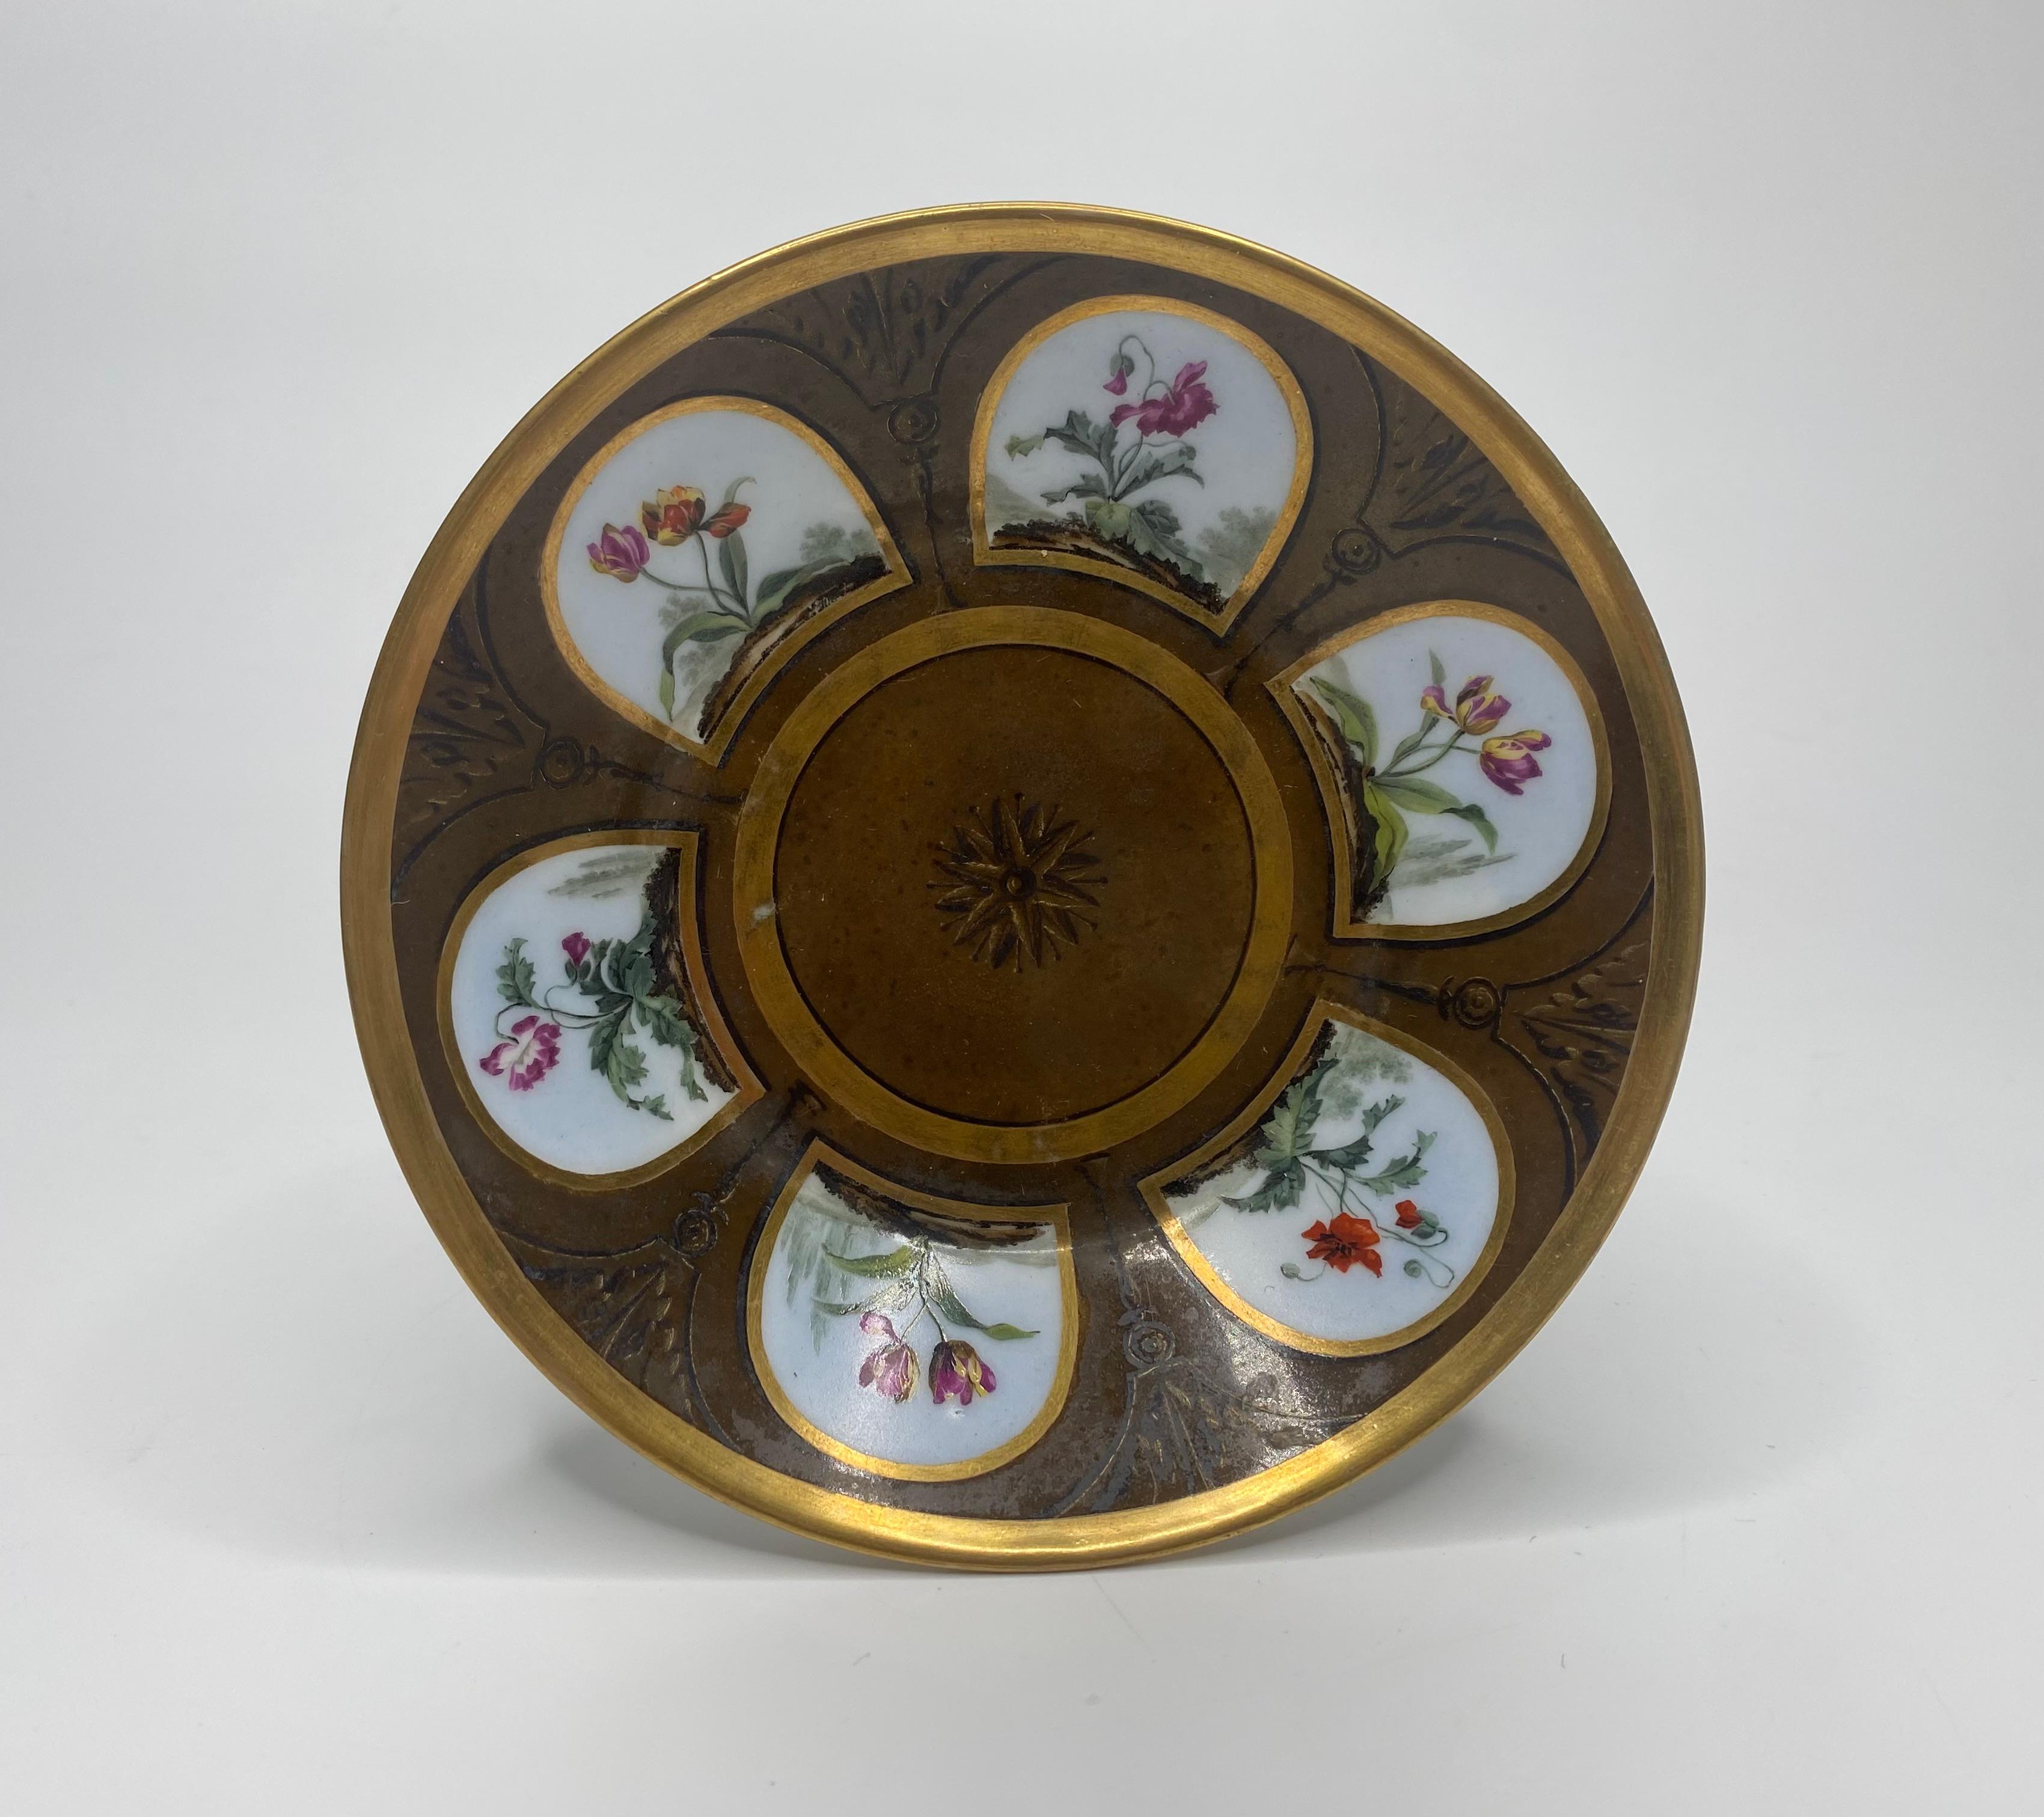 A fine Paris porcelain coffee can and saucer, possibly Dihl Et Guerhard, c. 1810. The coffee can, hand painted in the style of Gerard van Spaendonck, with panels of flowering plants, within gilt arched panels, divided by gilt and sepia architectural